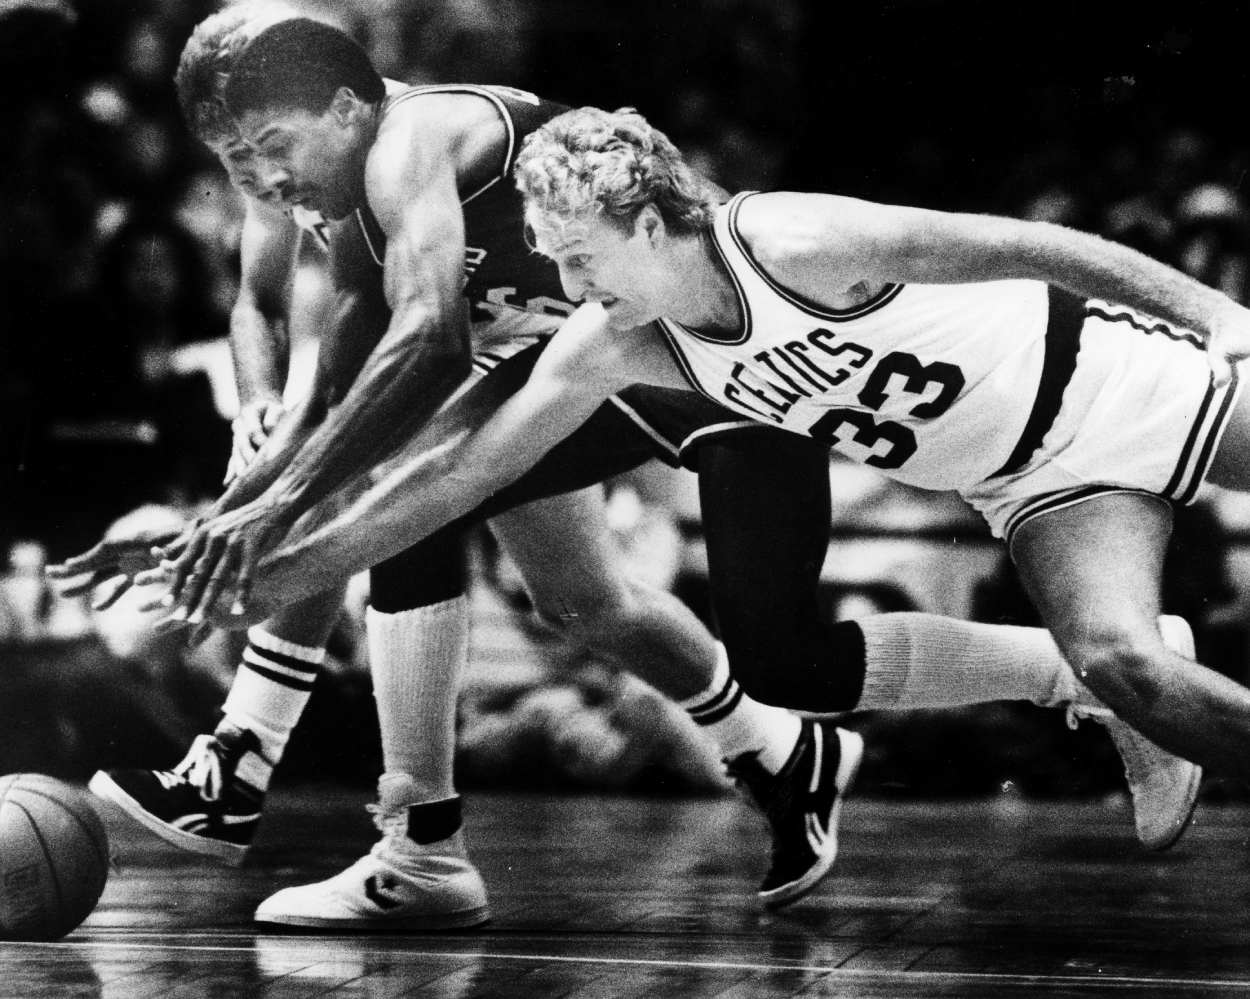 Left to right, Celtics player Danny Ainge, the Sixers' Julius Irving and the Celtics' Larry Bird dive for a loose ball.